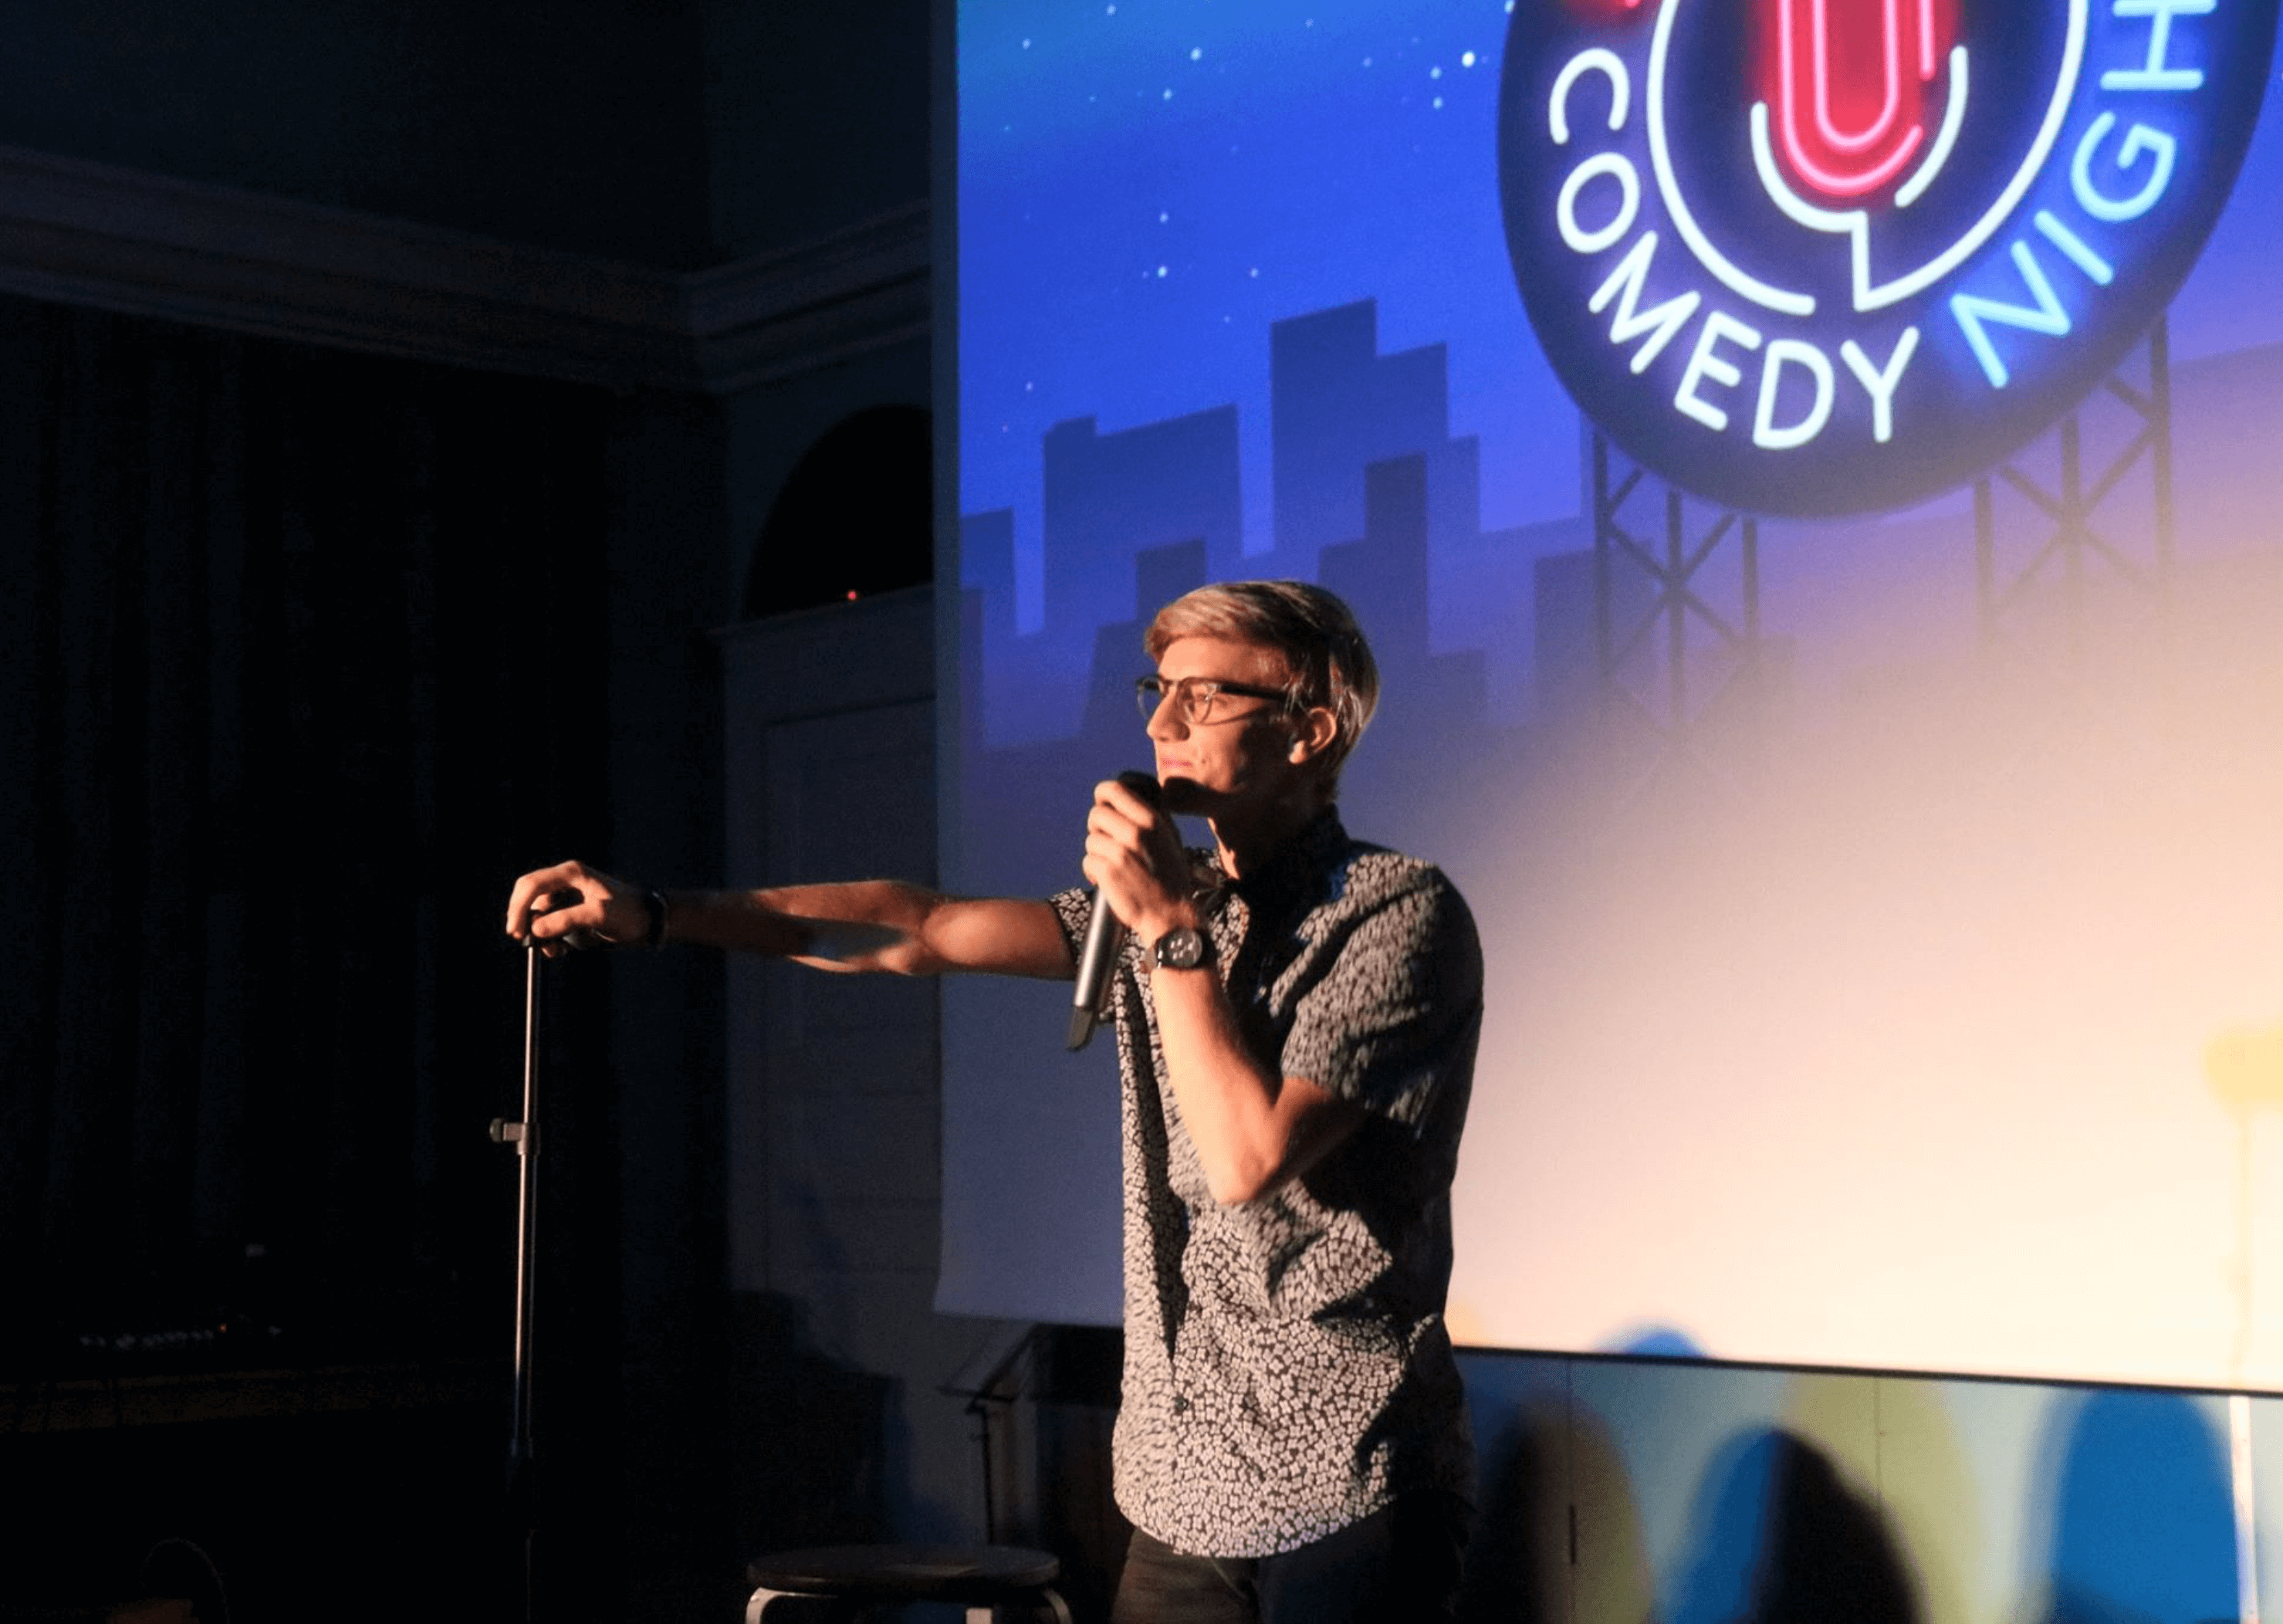 stand up show at folk high school in denmark